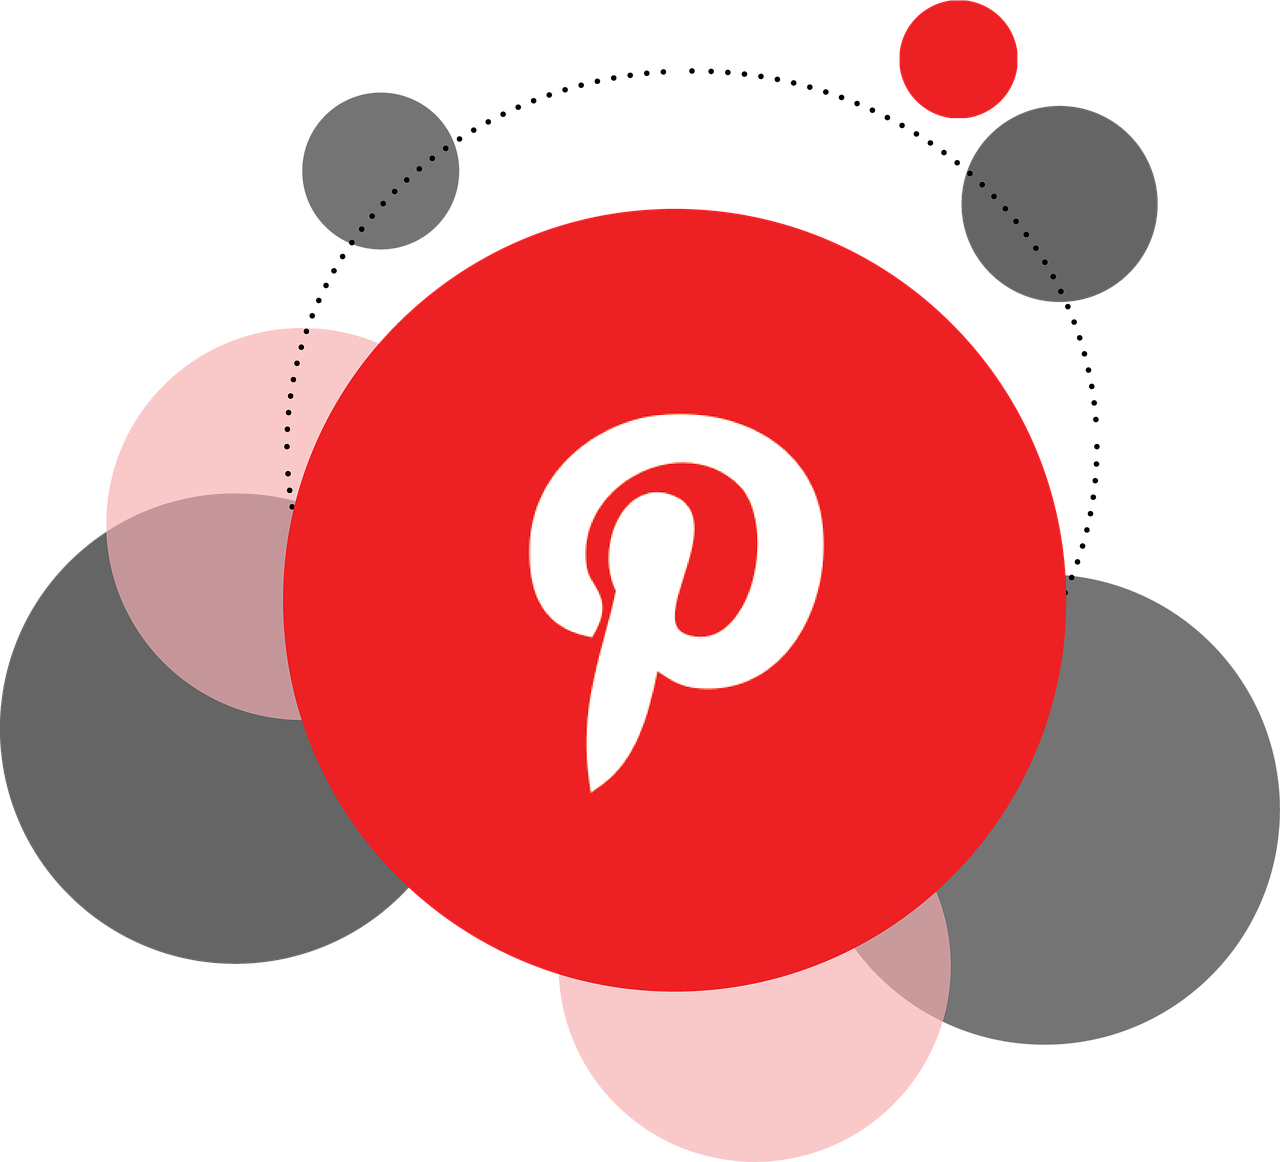 How to use Pinterest for Business: 8 strategies you should know